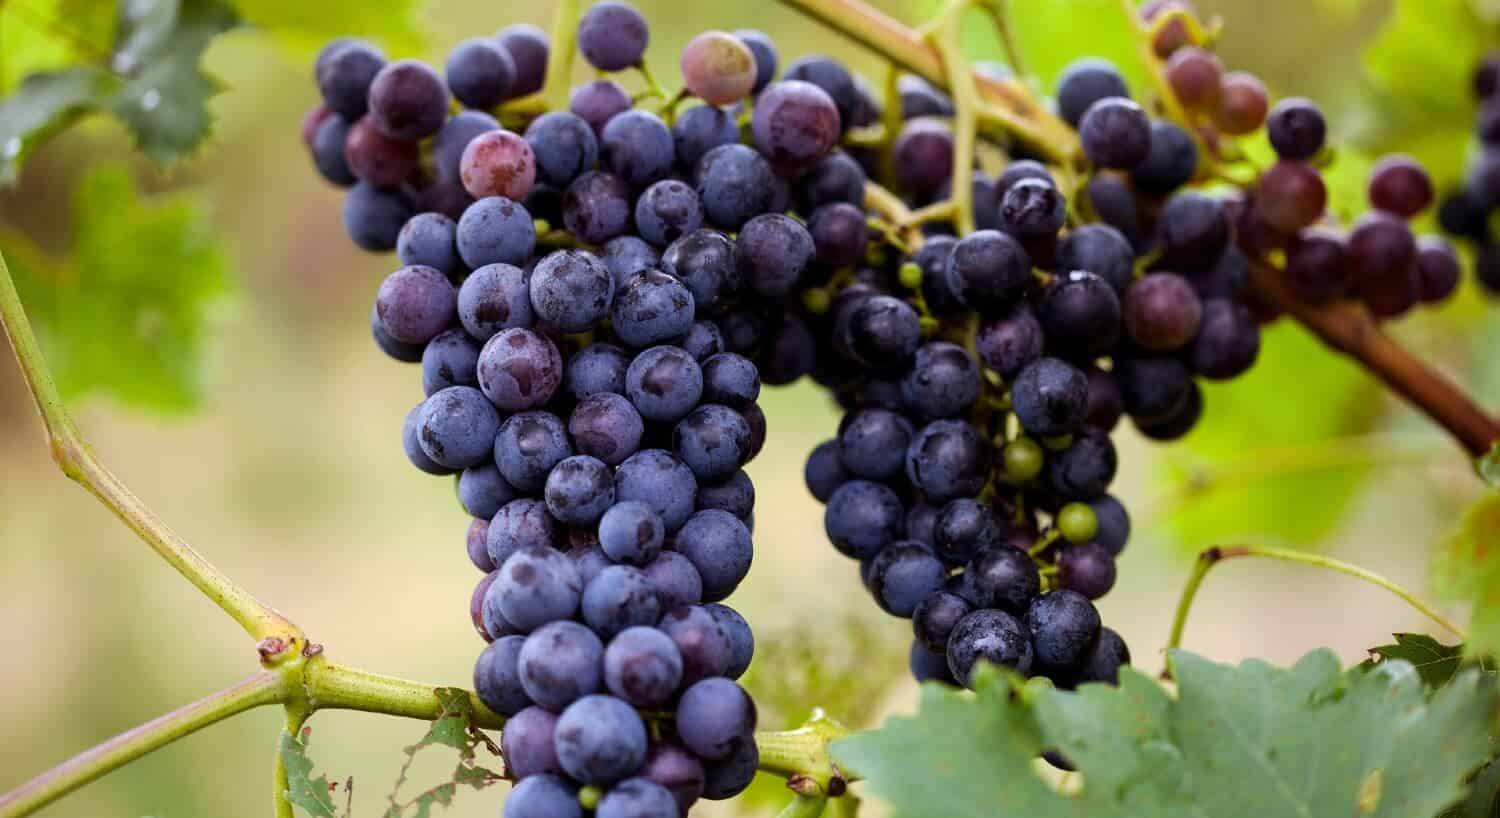 Two clusters of purple grapes hanging on a vine